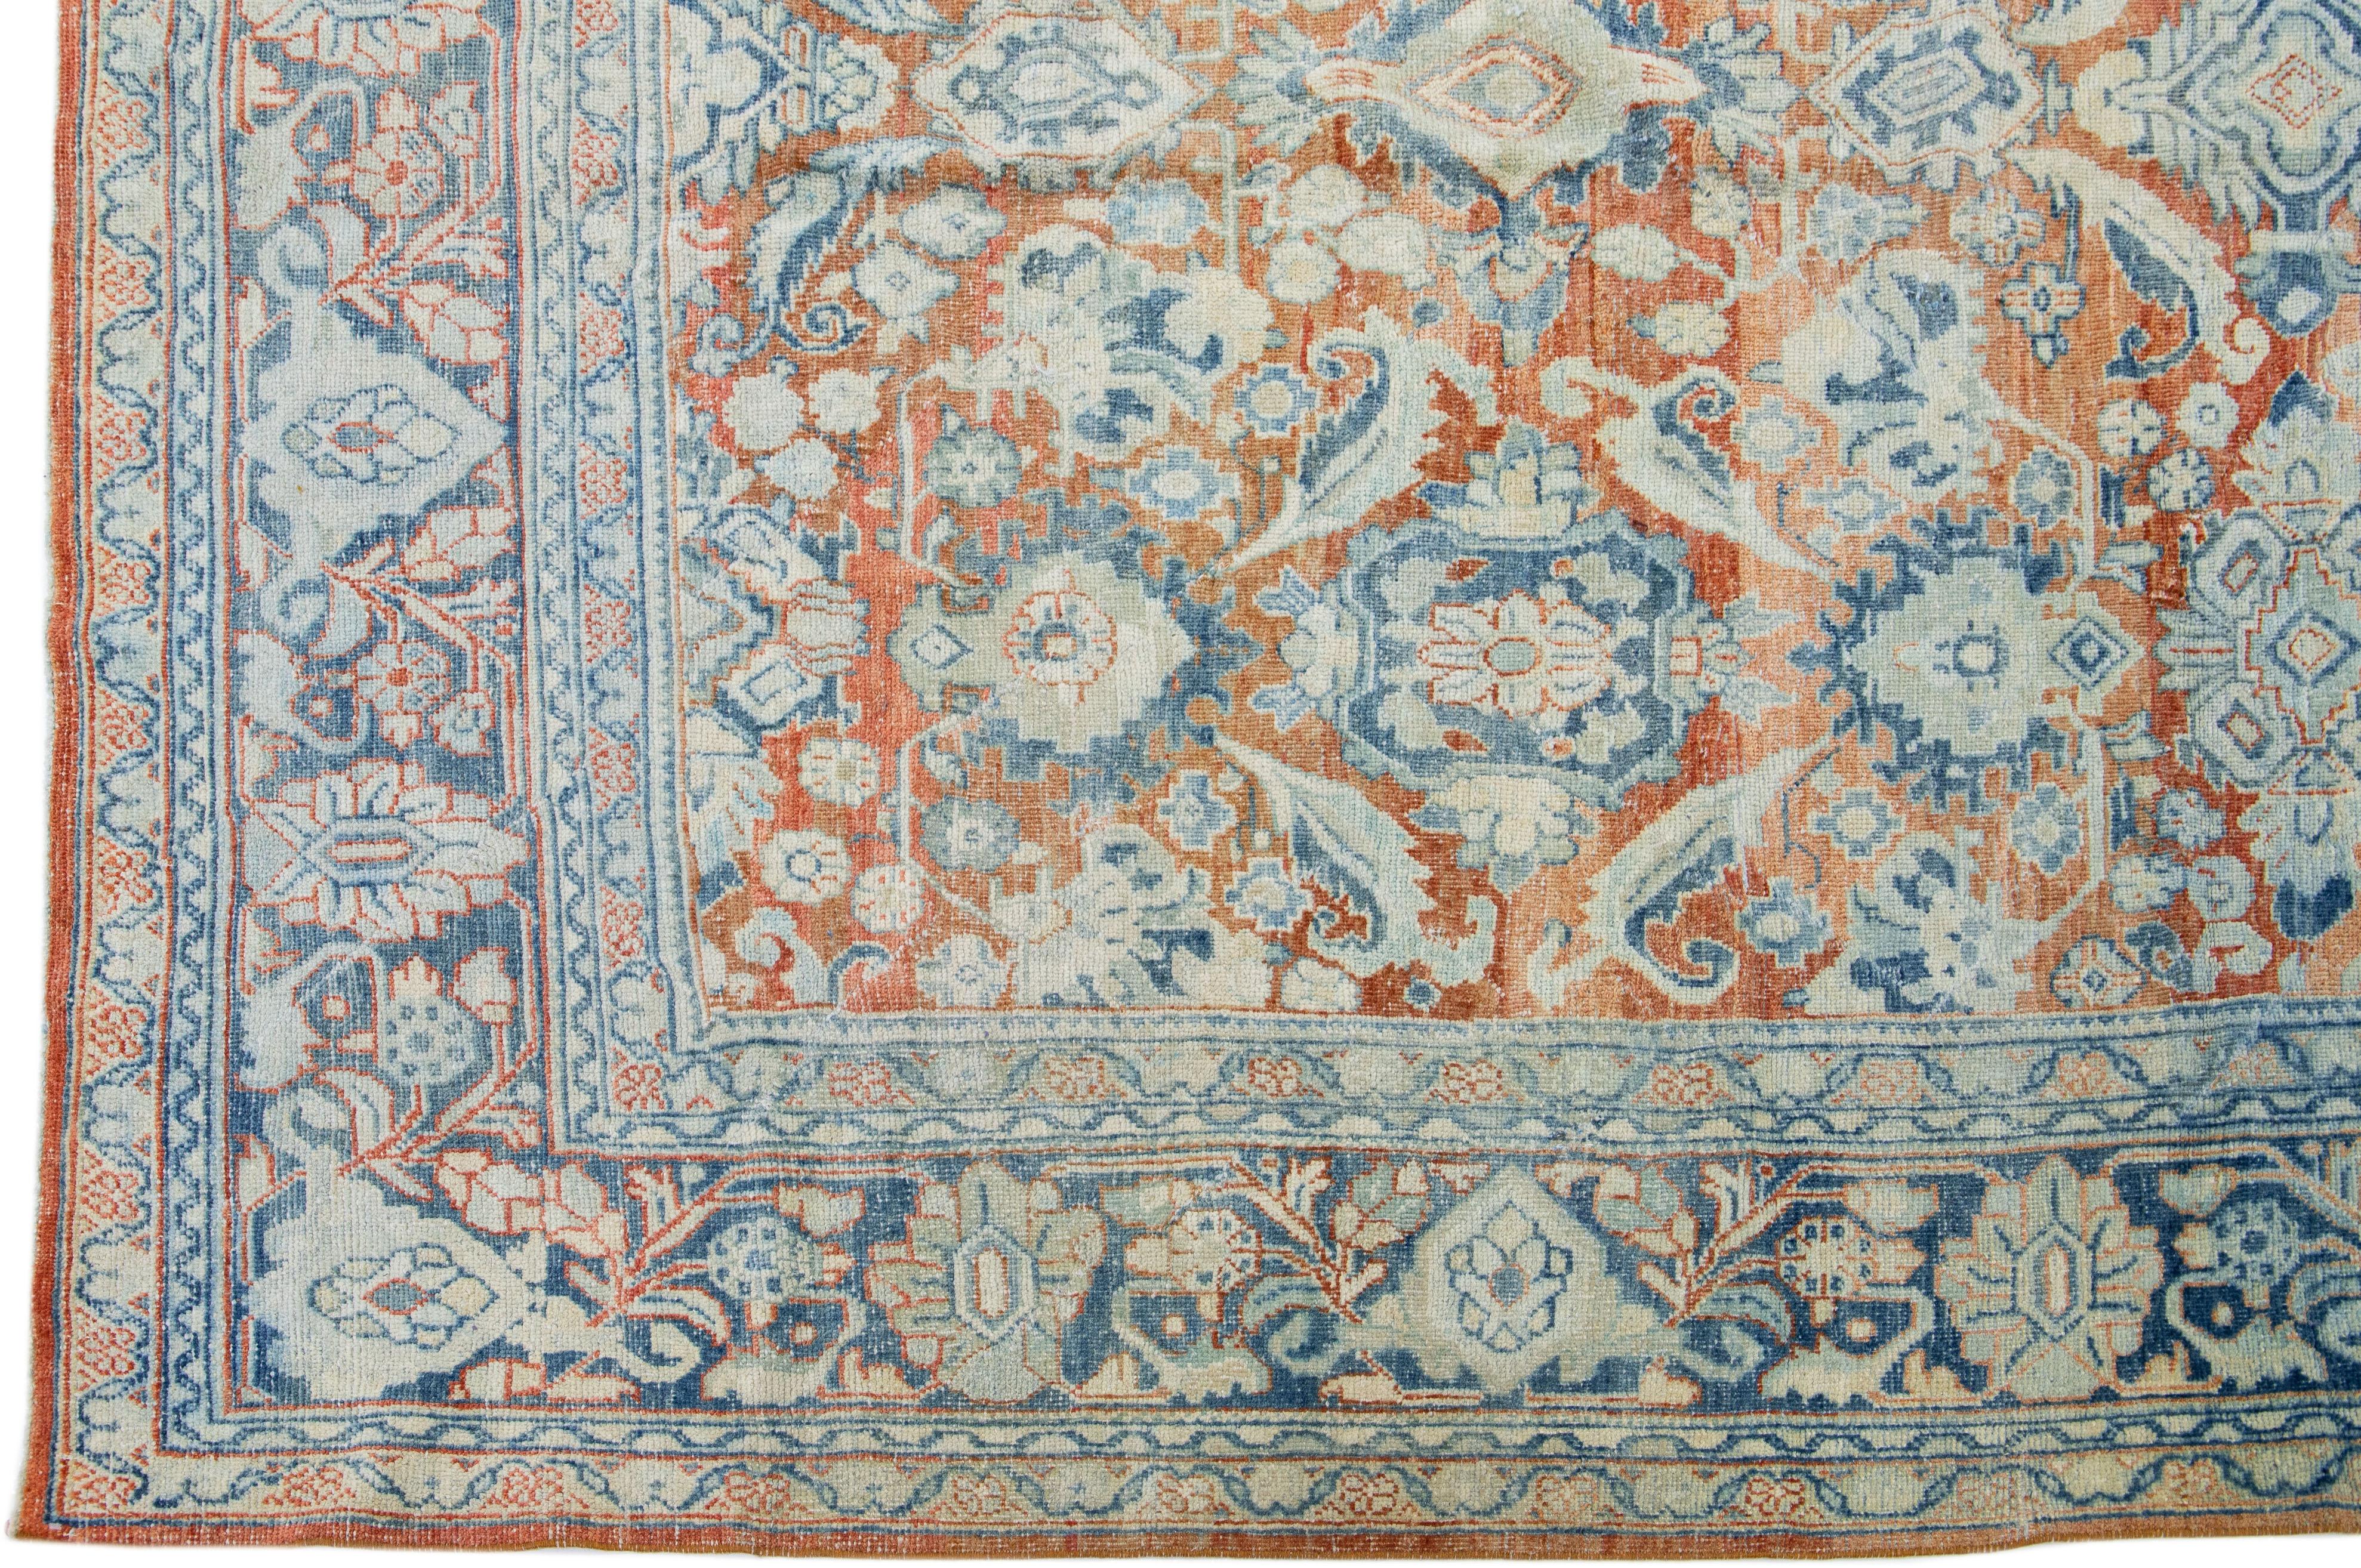  Antique Persian Mahal Handmade Wool Rug with Allover Motif in Rust  In Good Condition For Sale In Norwalk, CT